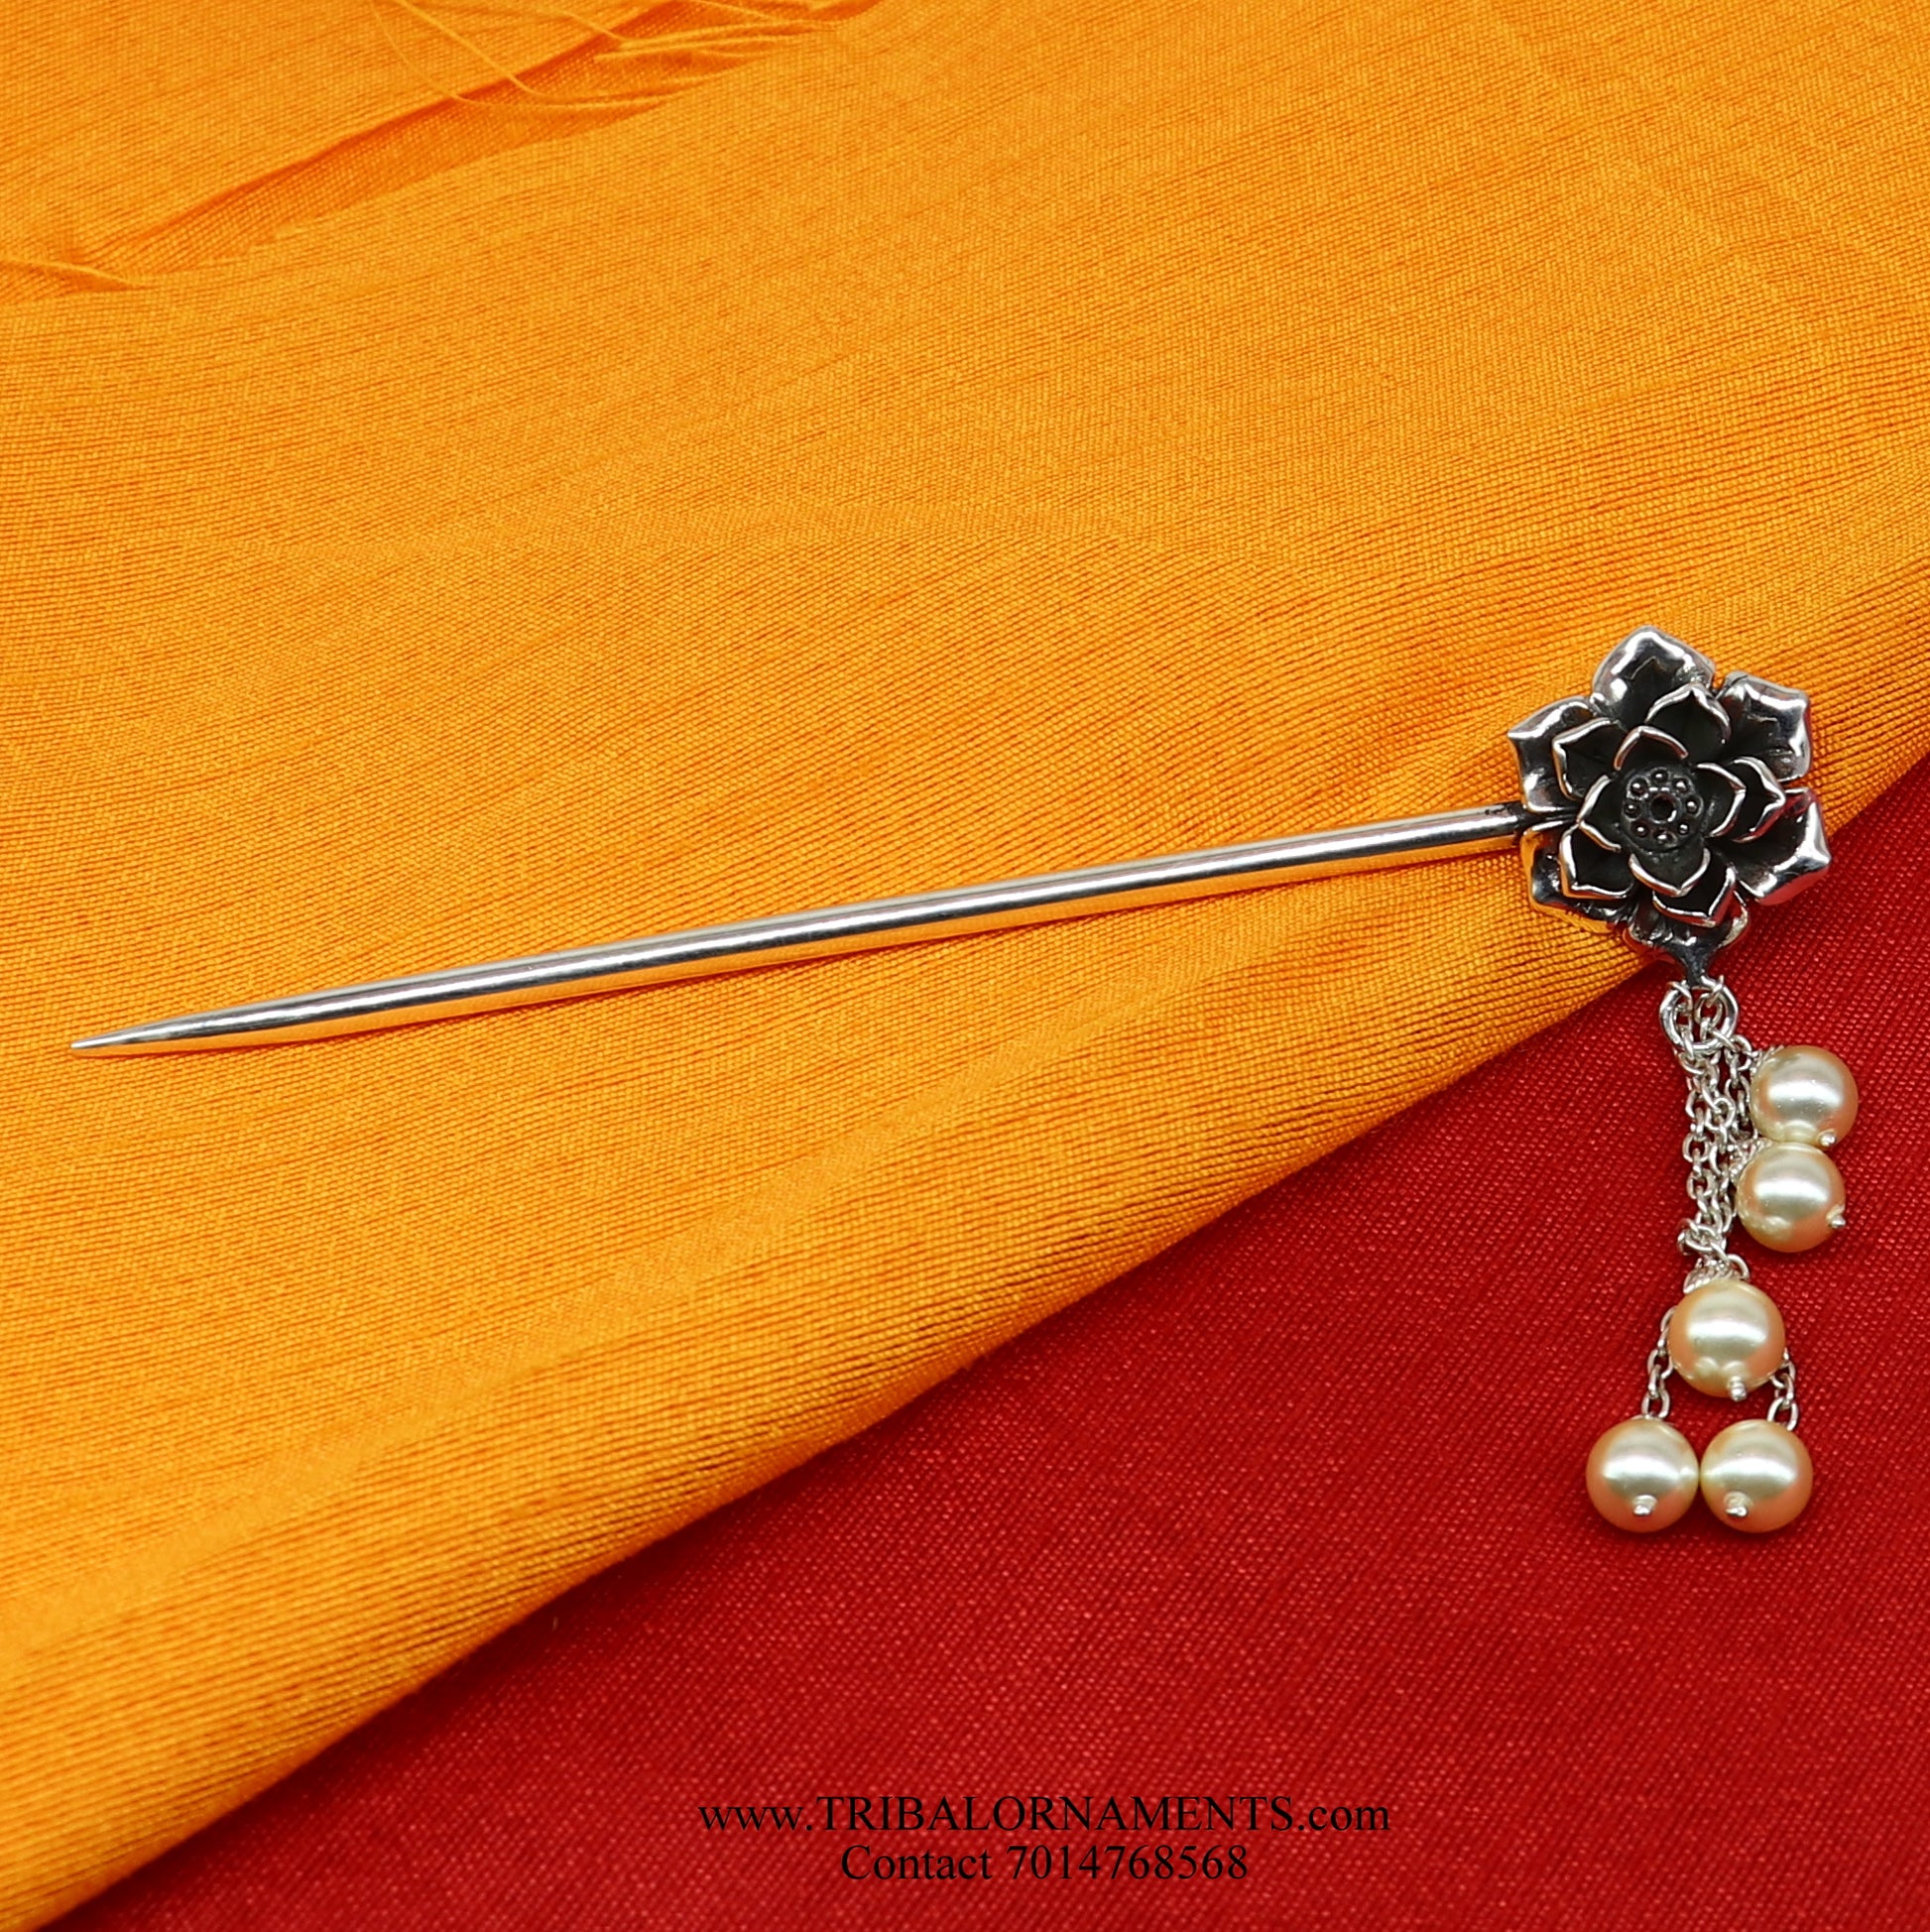 Sterling Silver Hairpin Juda Pin Floral pattern for Women 92.5 Pure and Certified HC07 - TRIBAL ORNAMENTS